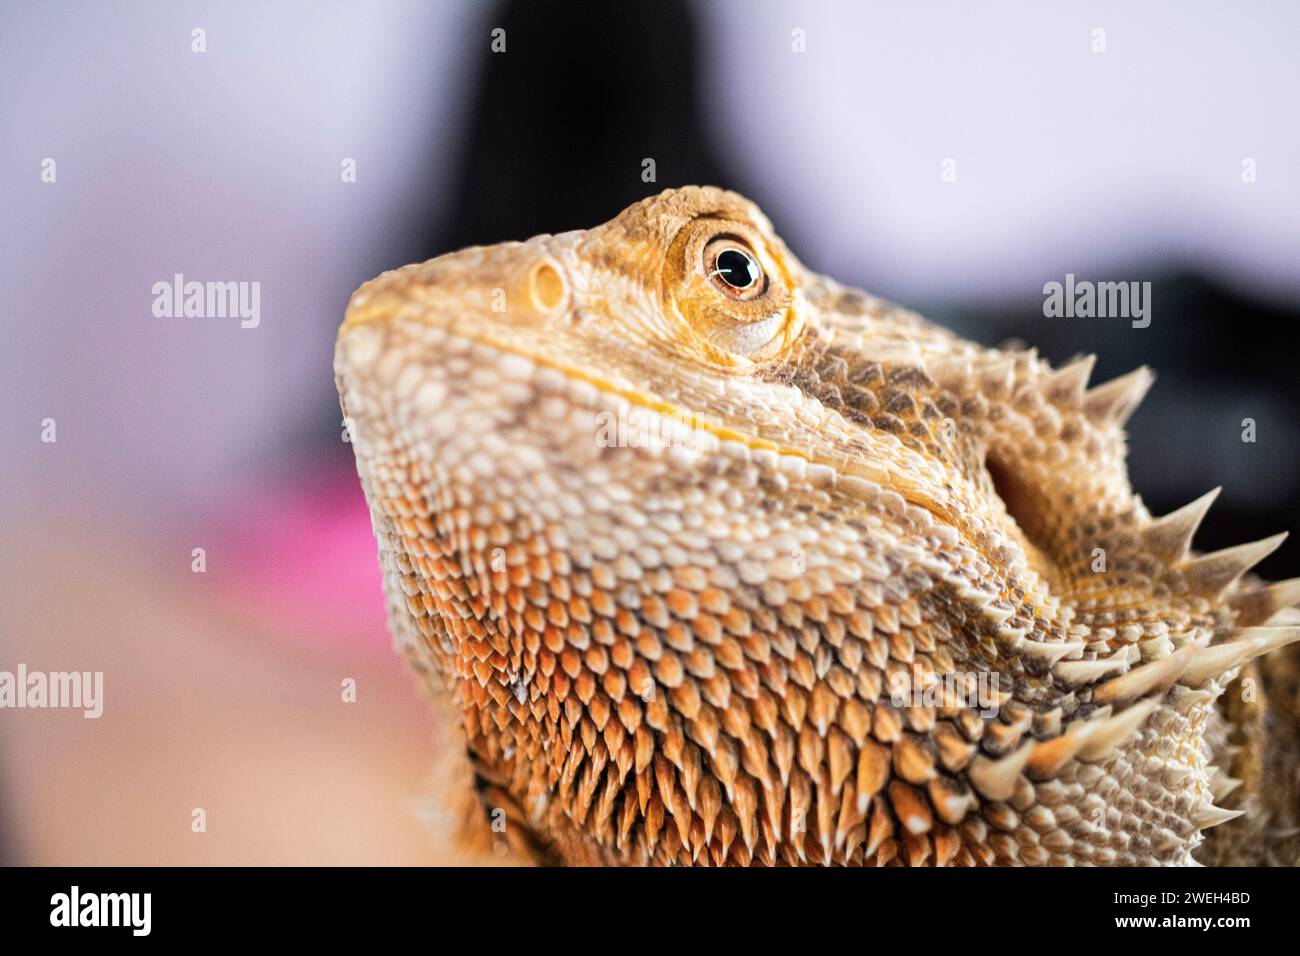 close-up of a bearded dragon's face, showing the eye and beard in clarity Stock Photo